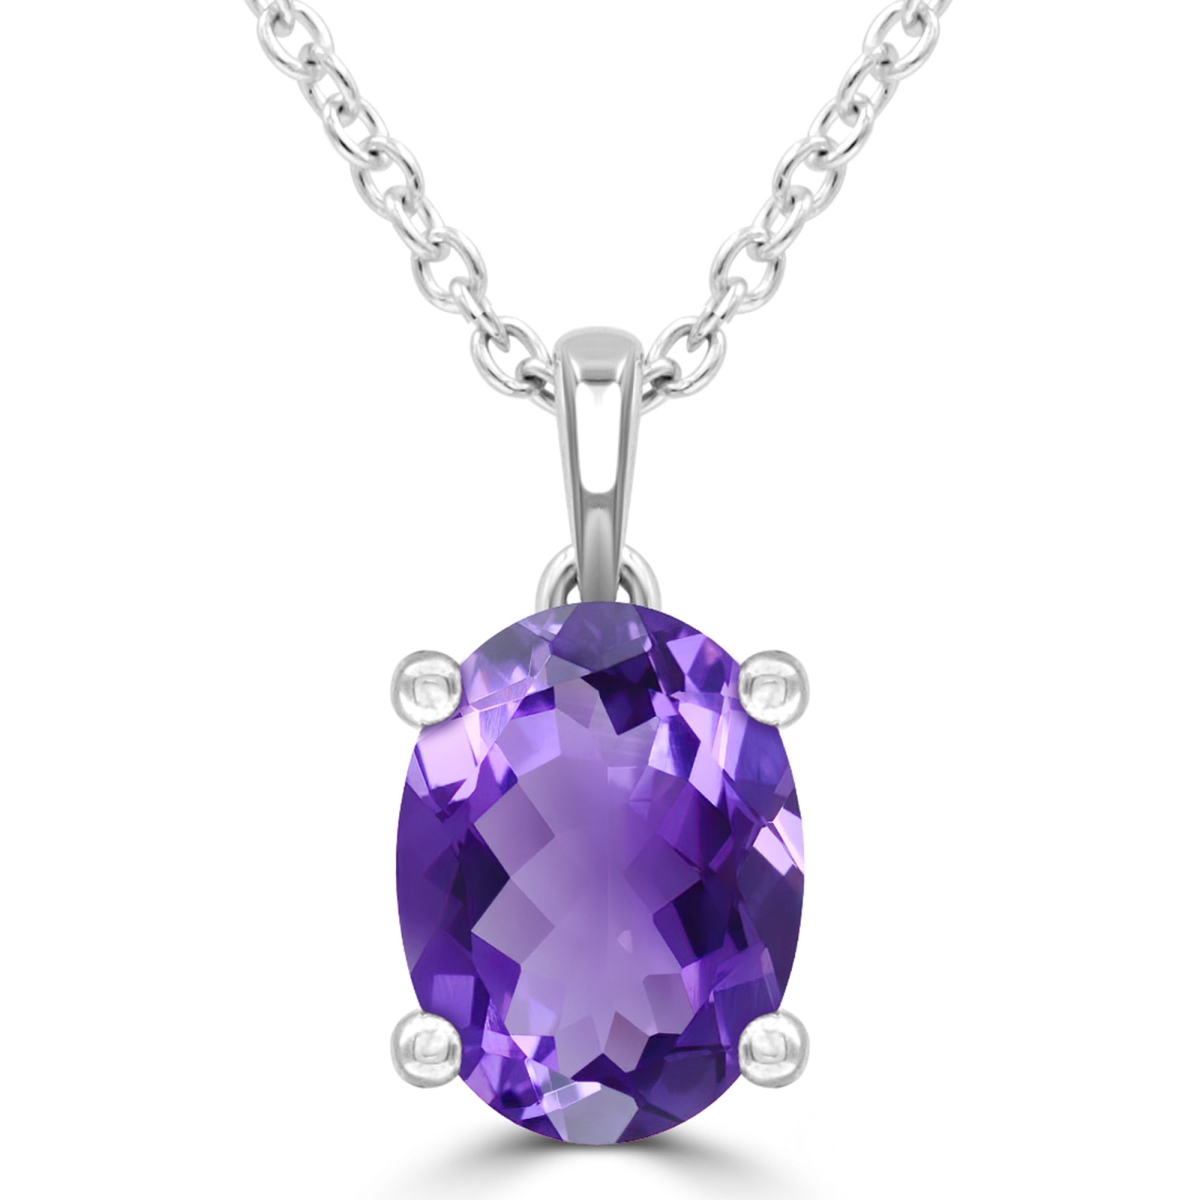 Picture of Majesty Diamonds MDR220139 1.1 CTW Oval Purple Amethyst Solitaire Pendant Necklace in 14K White Gold